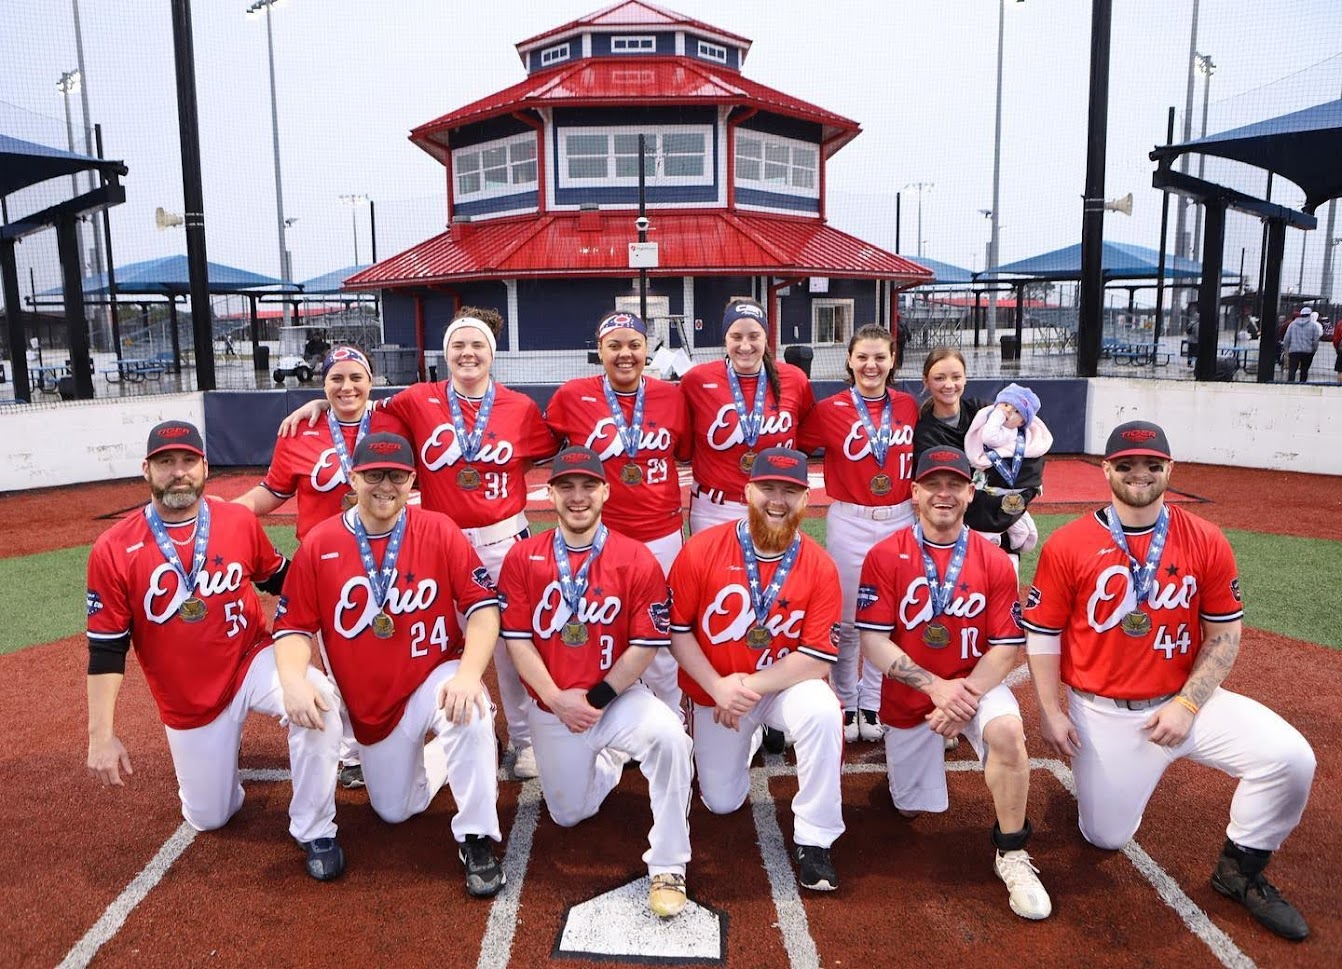 2022 USSSA Challenge Cup Crowns 25 Champions! Conference USSSA